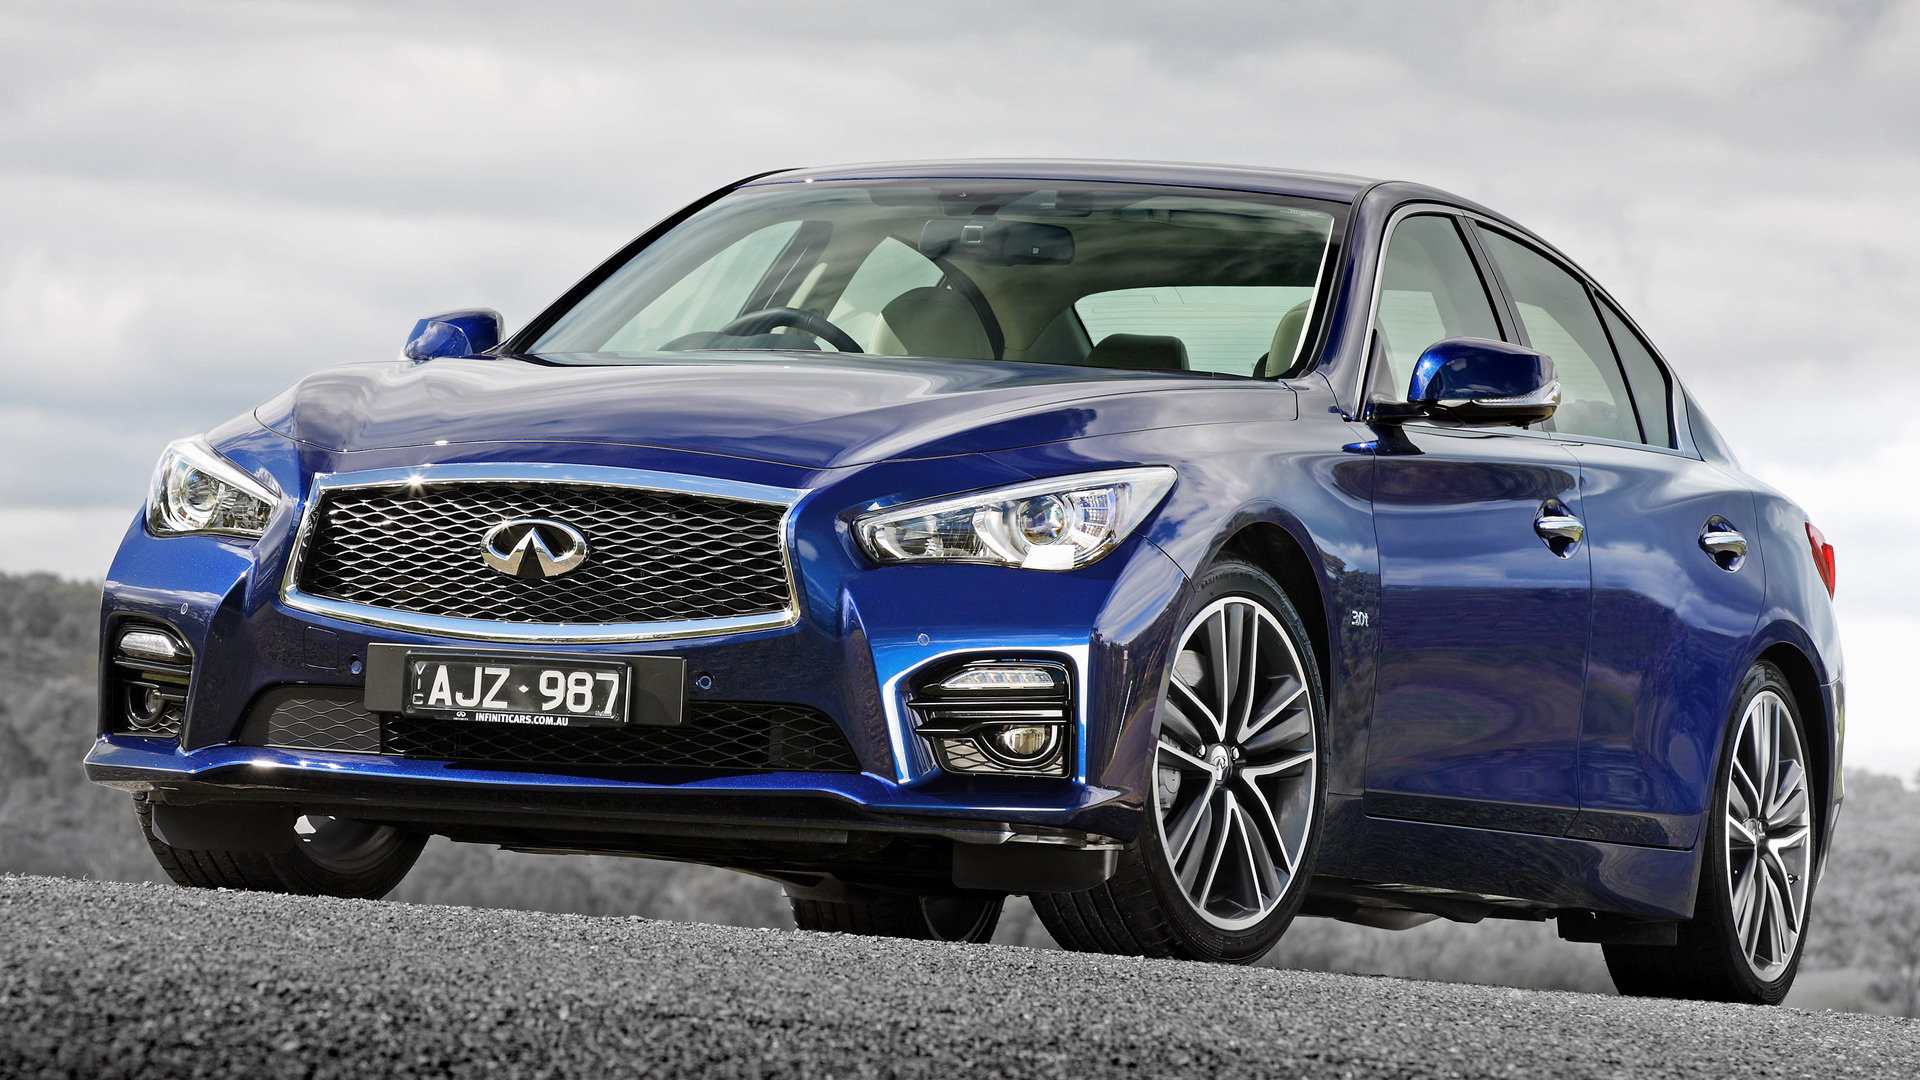 2014 Infiniti Q50 Sport (AU) - Wallpapers and HD Images | Car Pixel